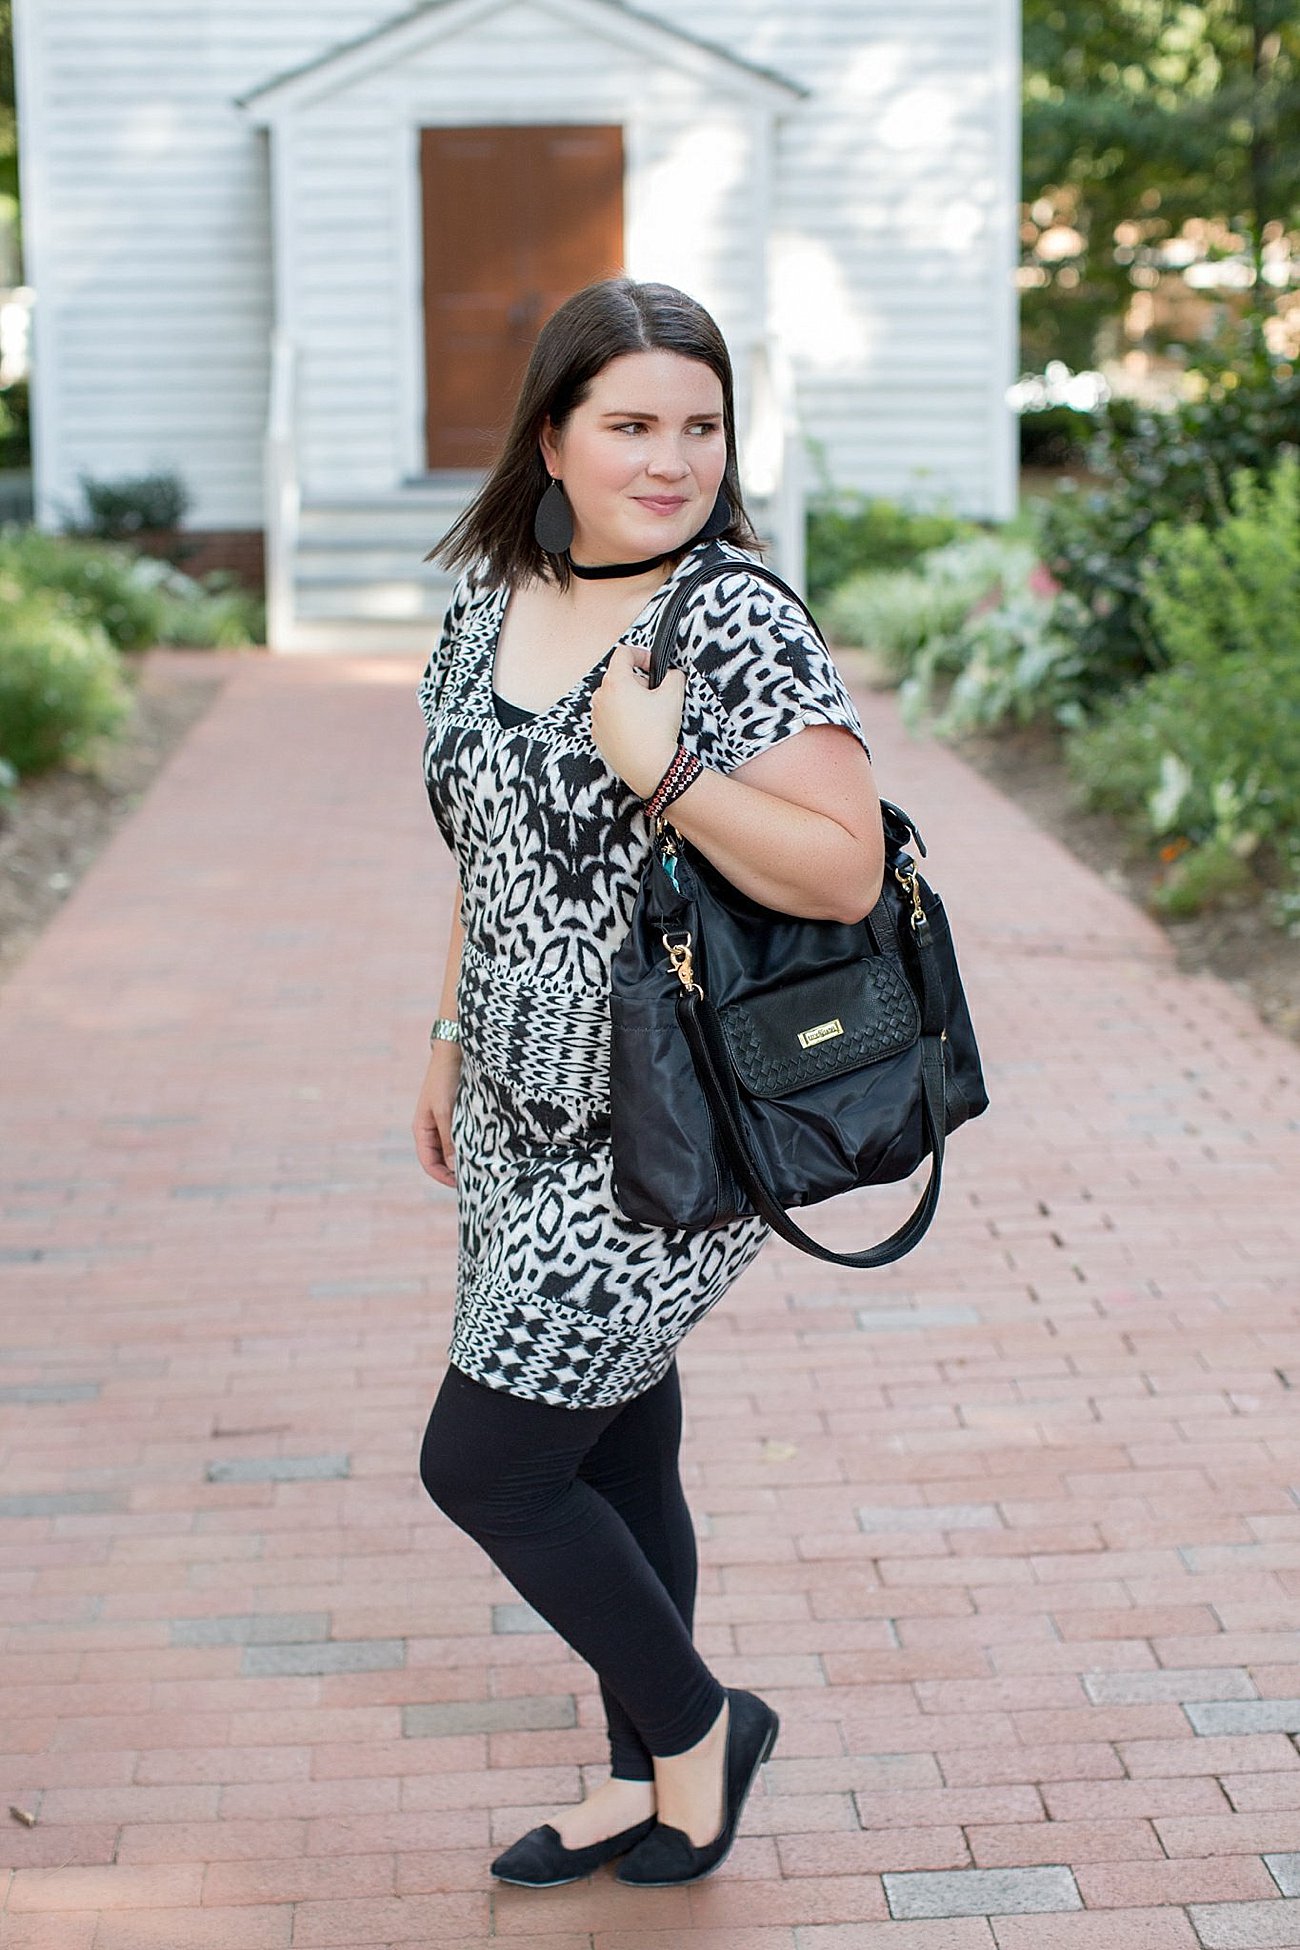 Threads for Thought "Mia Dress", LulaRoe black leggings, Lily Jade diaper bag, Nickel & Suede choker, Nickel & Suede earrings, Darzah stitched leather cuff | ethical fashion blogger, north carolina fashion blogger (5)